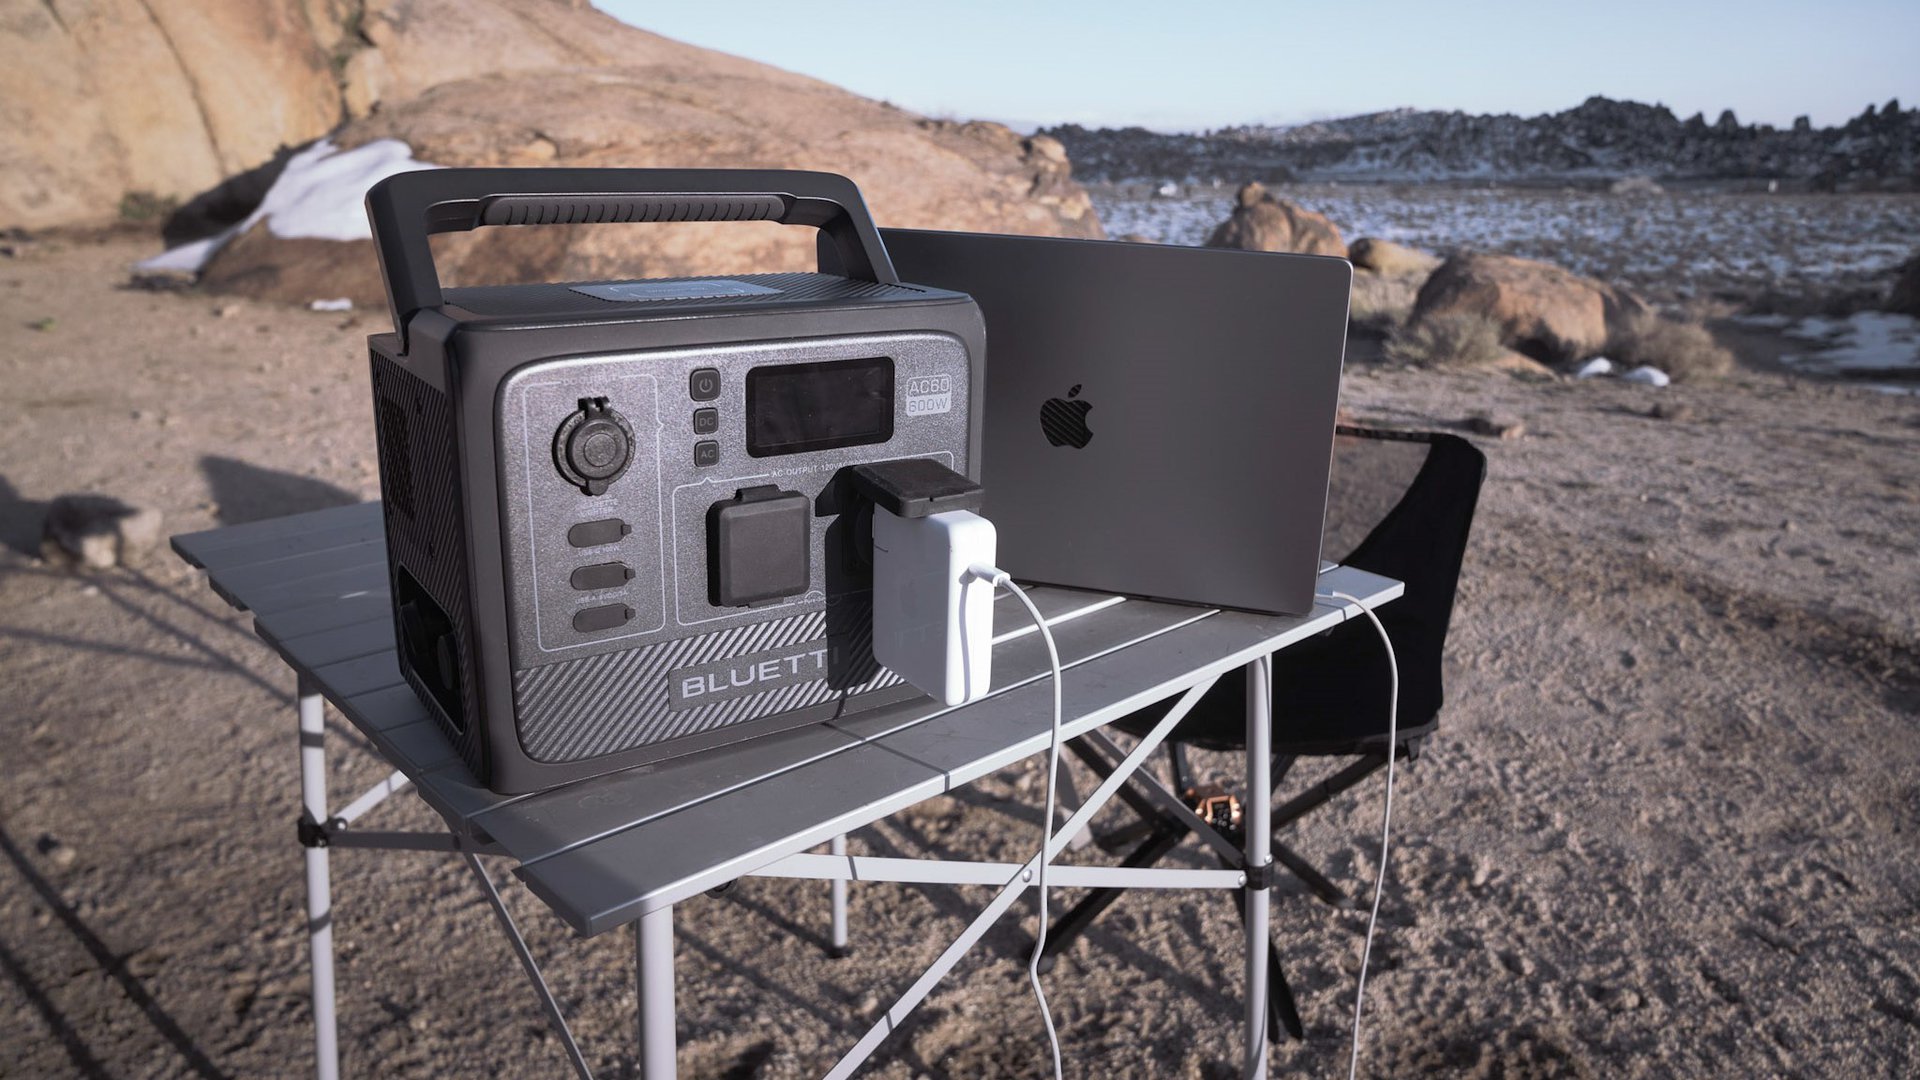 The BLUETTI AC60 portable power station is the ideal outdoor companion